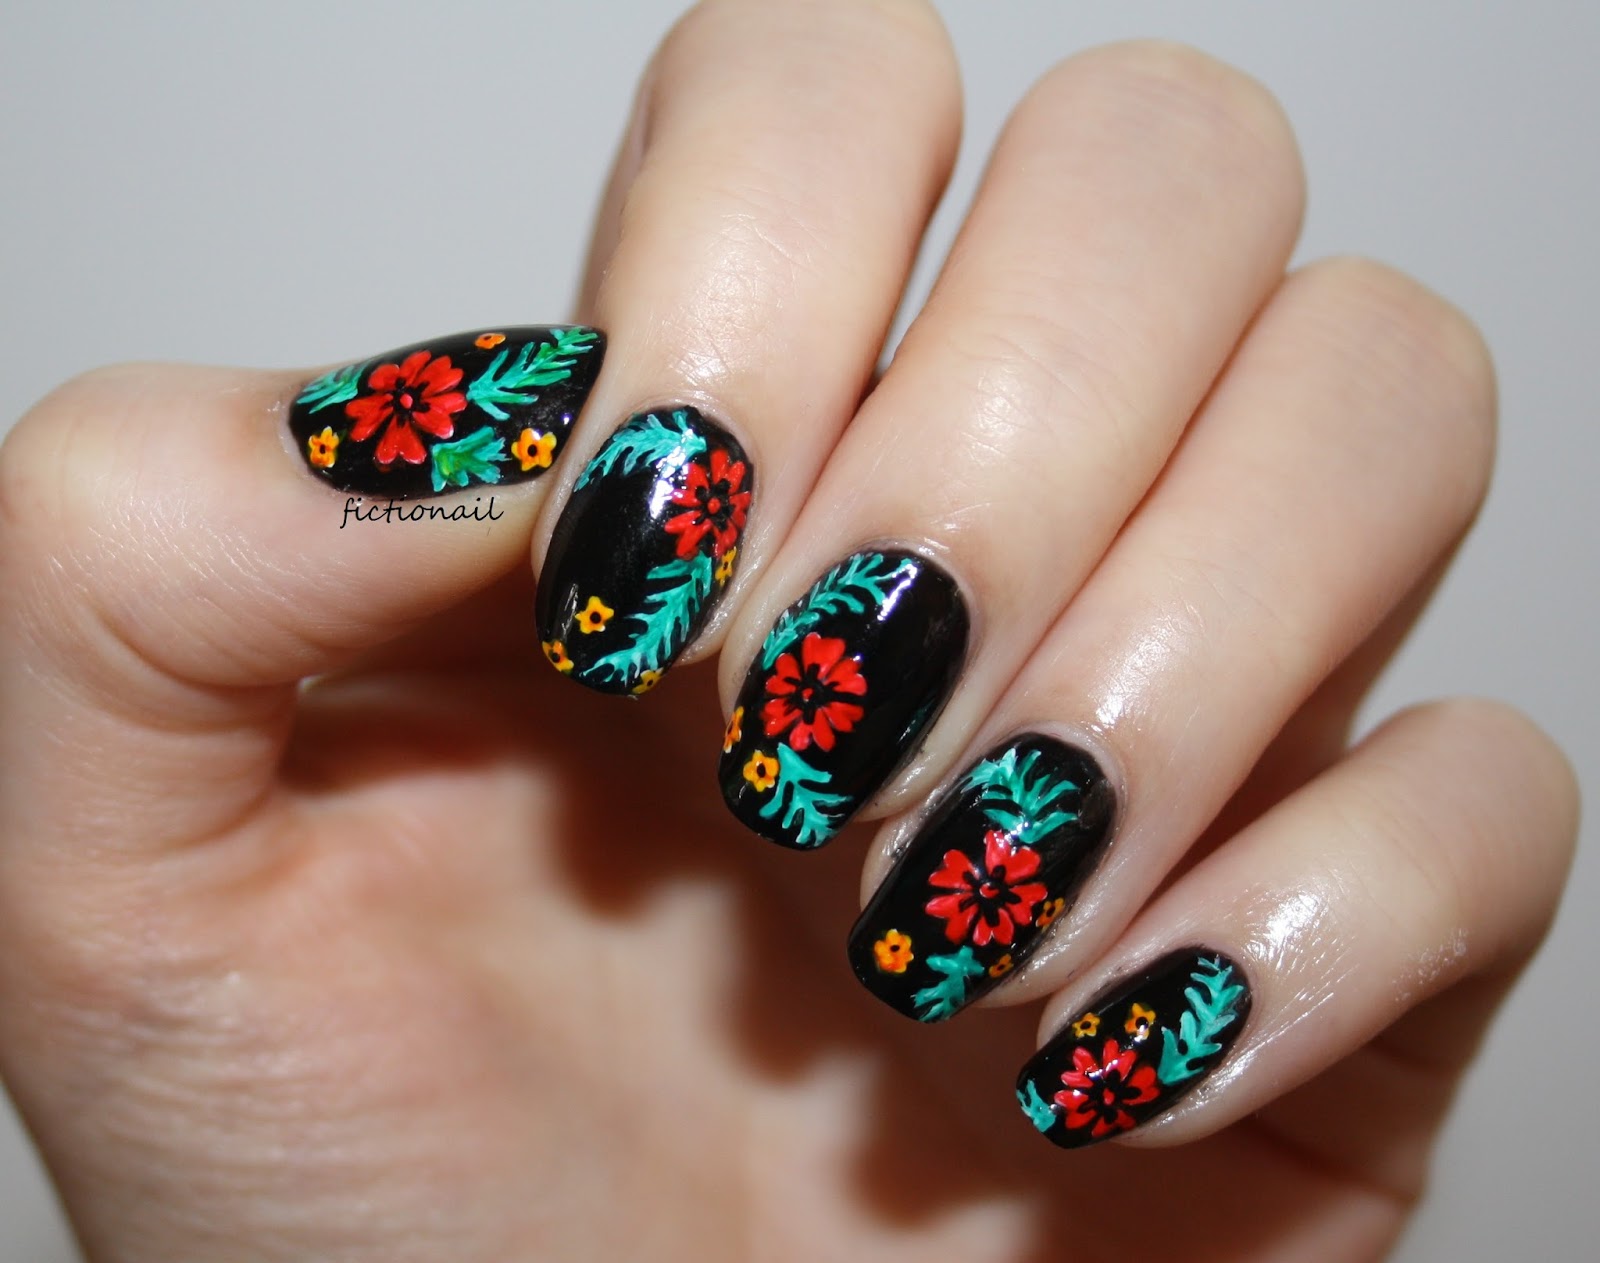 6. Step by Step Guide to Floral Nails - wide 6